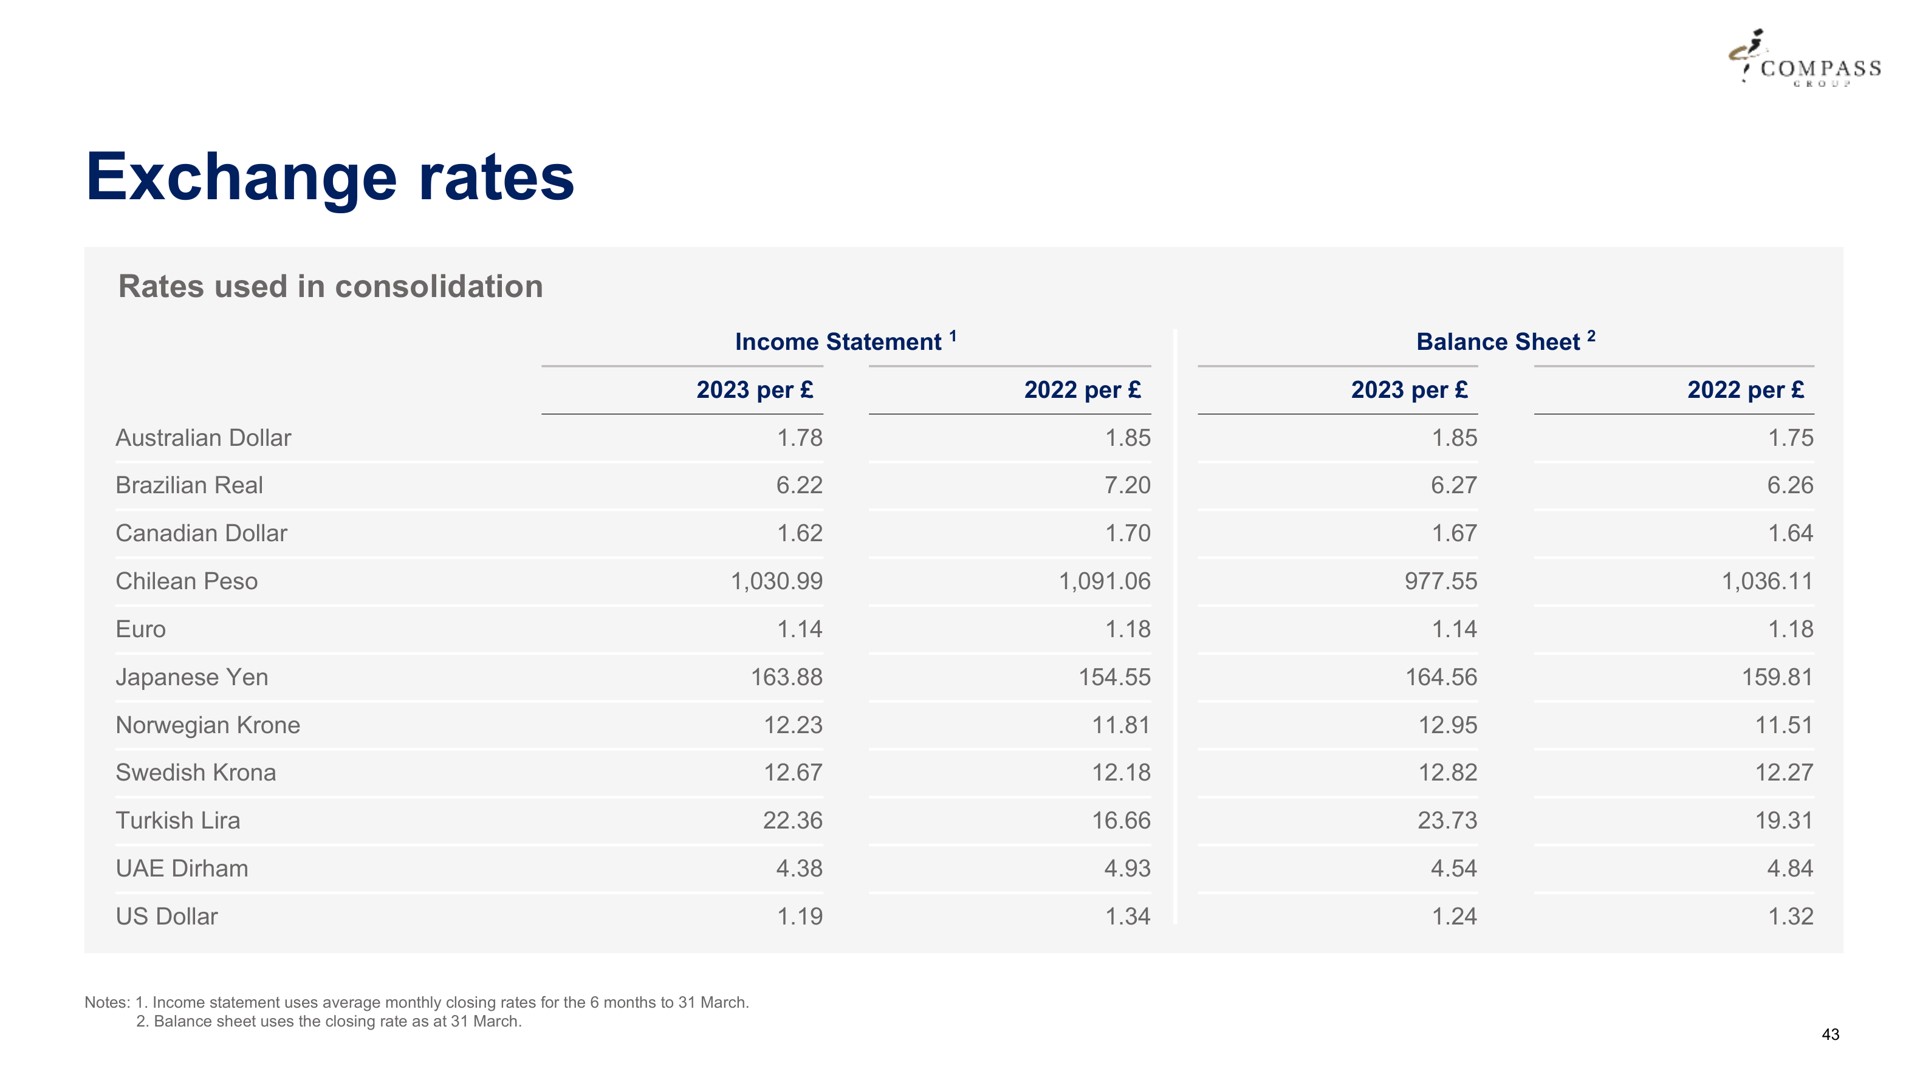 exchange rates used in consolidation | Compass Group